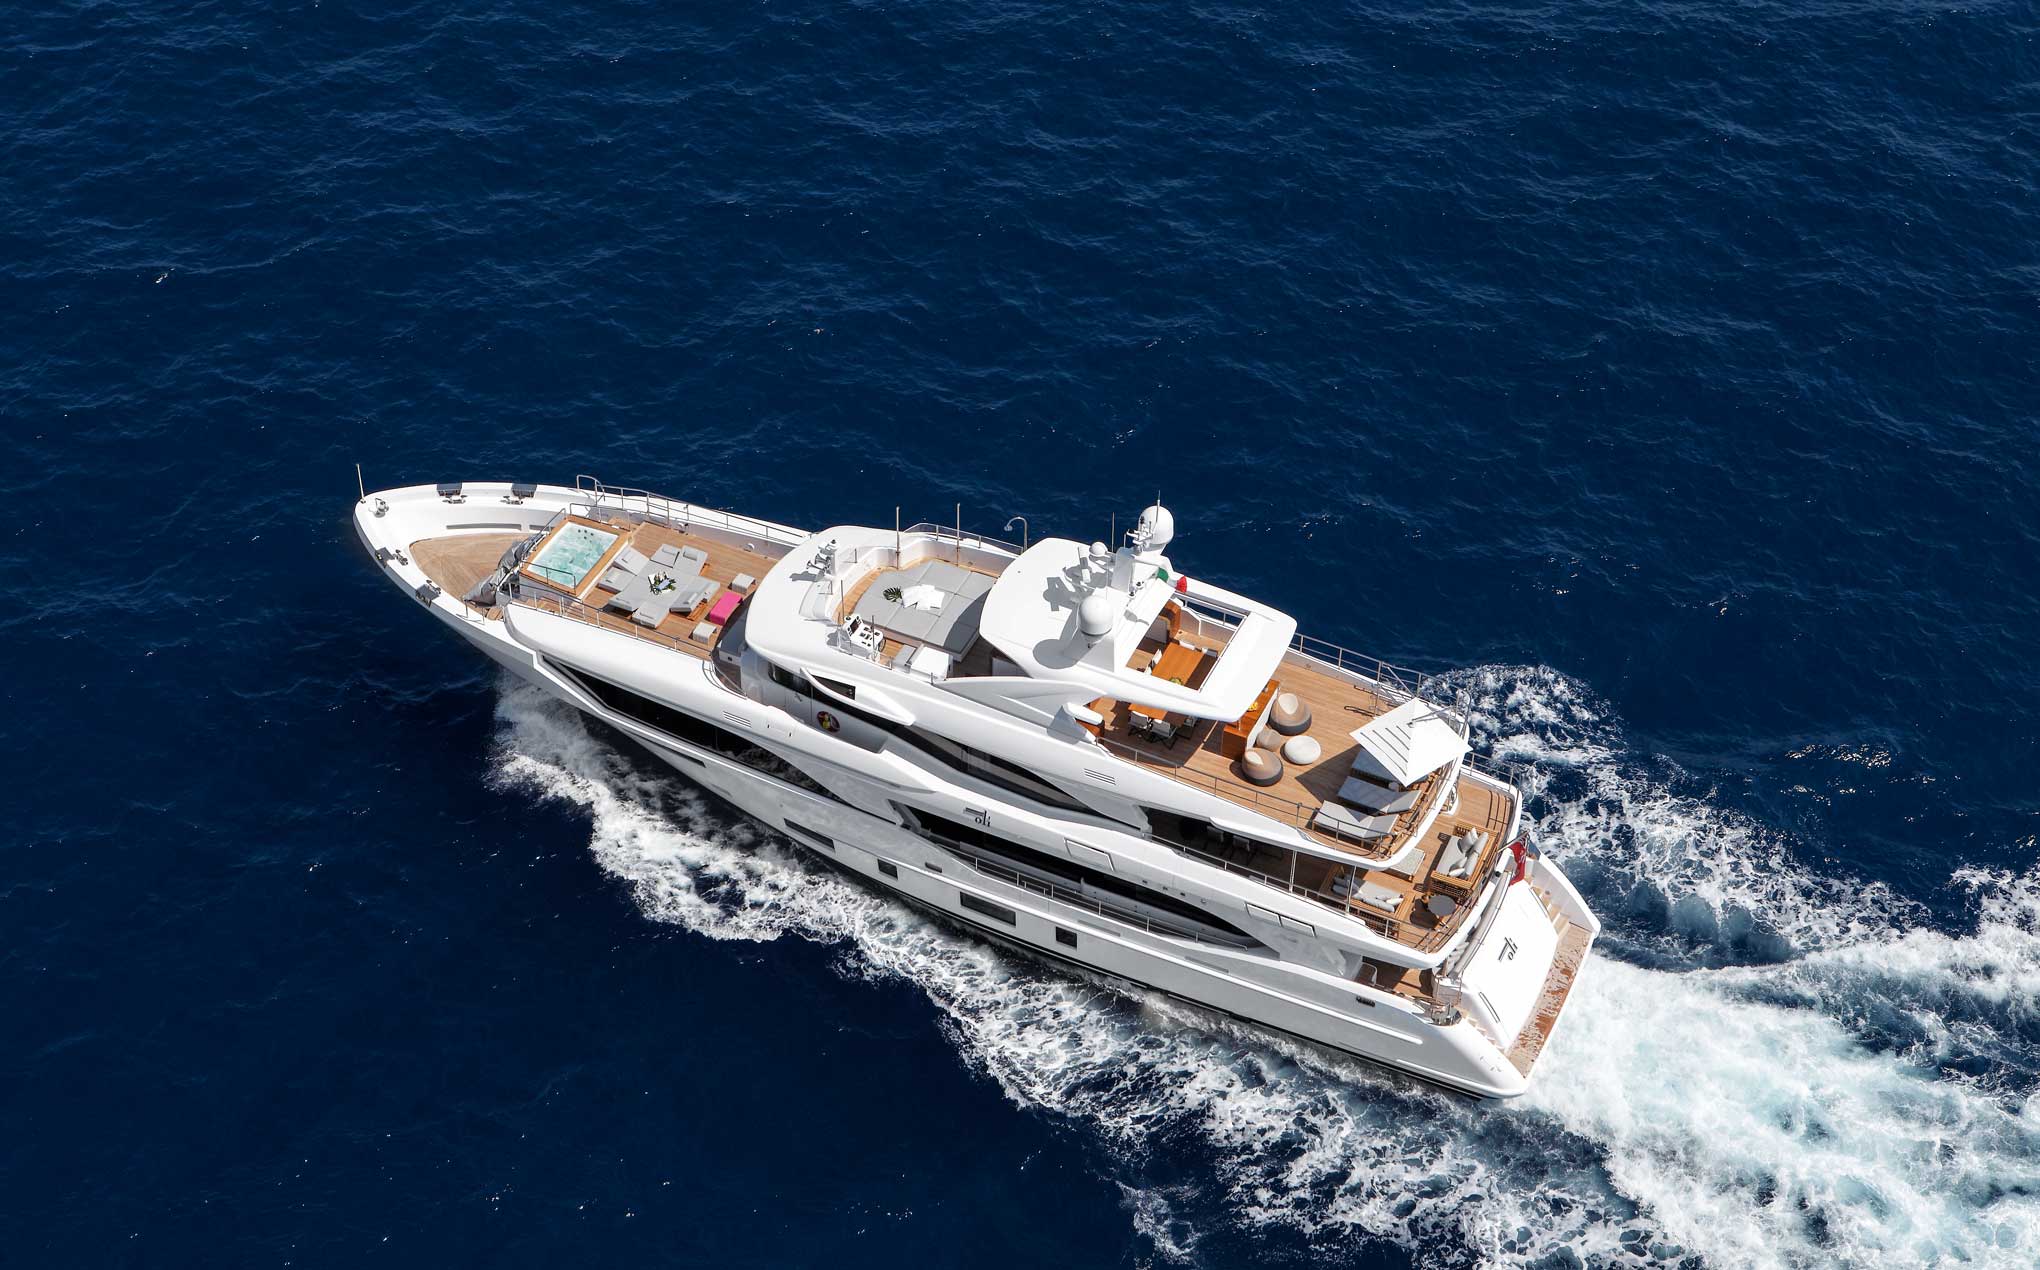 MEDITERRANEO 116 By Benetti - From Above